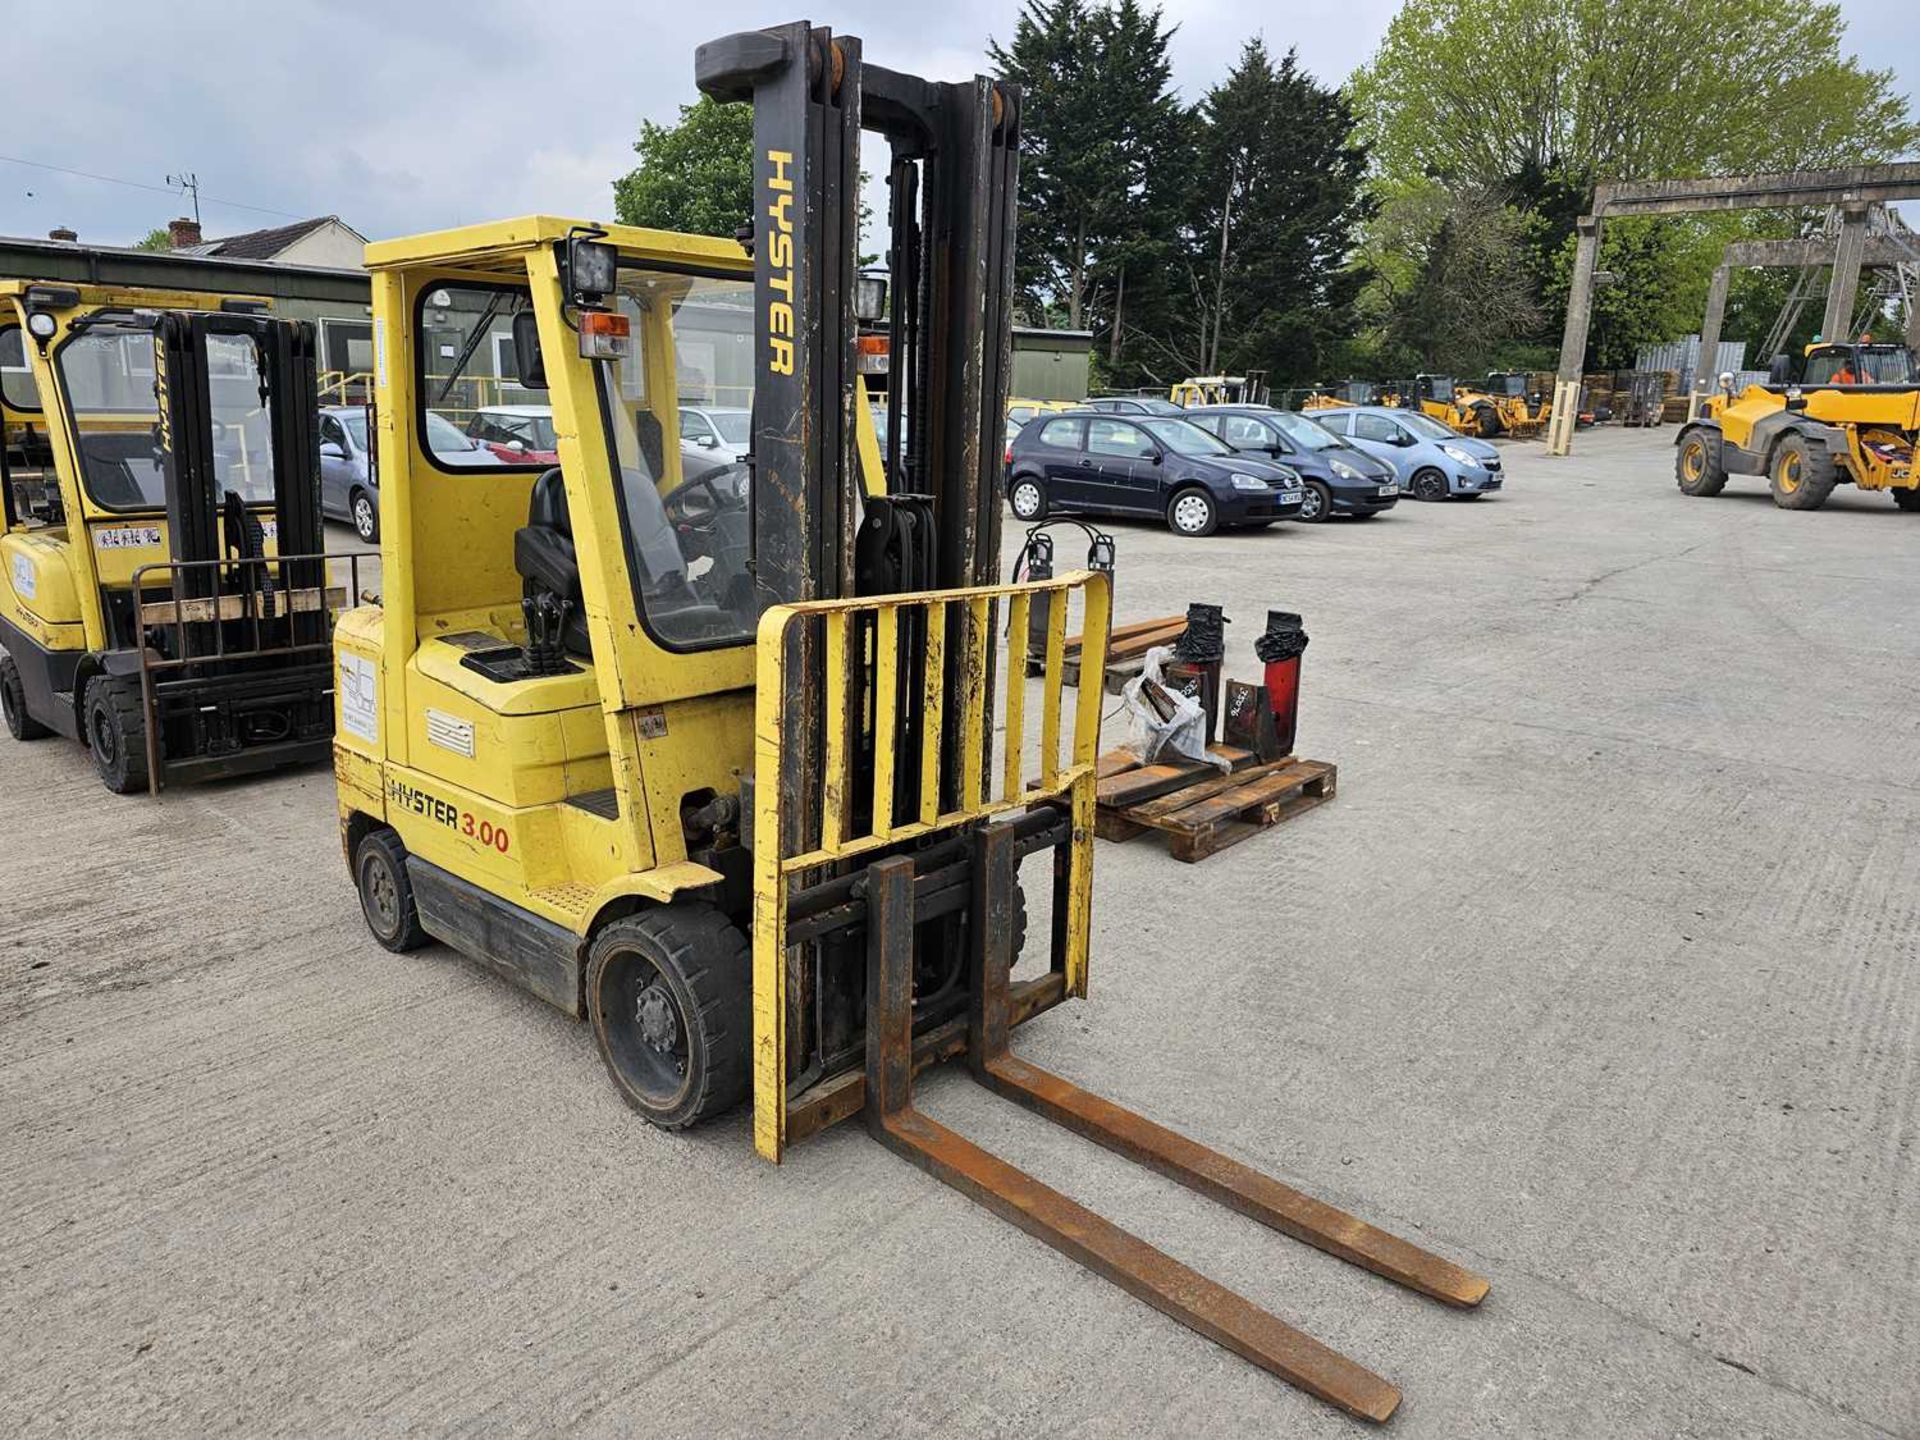 2002 Hyster S3.00XM-U Gas Forklift, 3 Stage Free Lift Mast, Side Shift, Forks (Non Runner) - Image 4 of 15